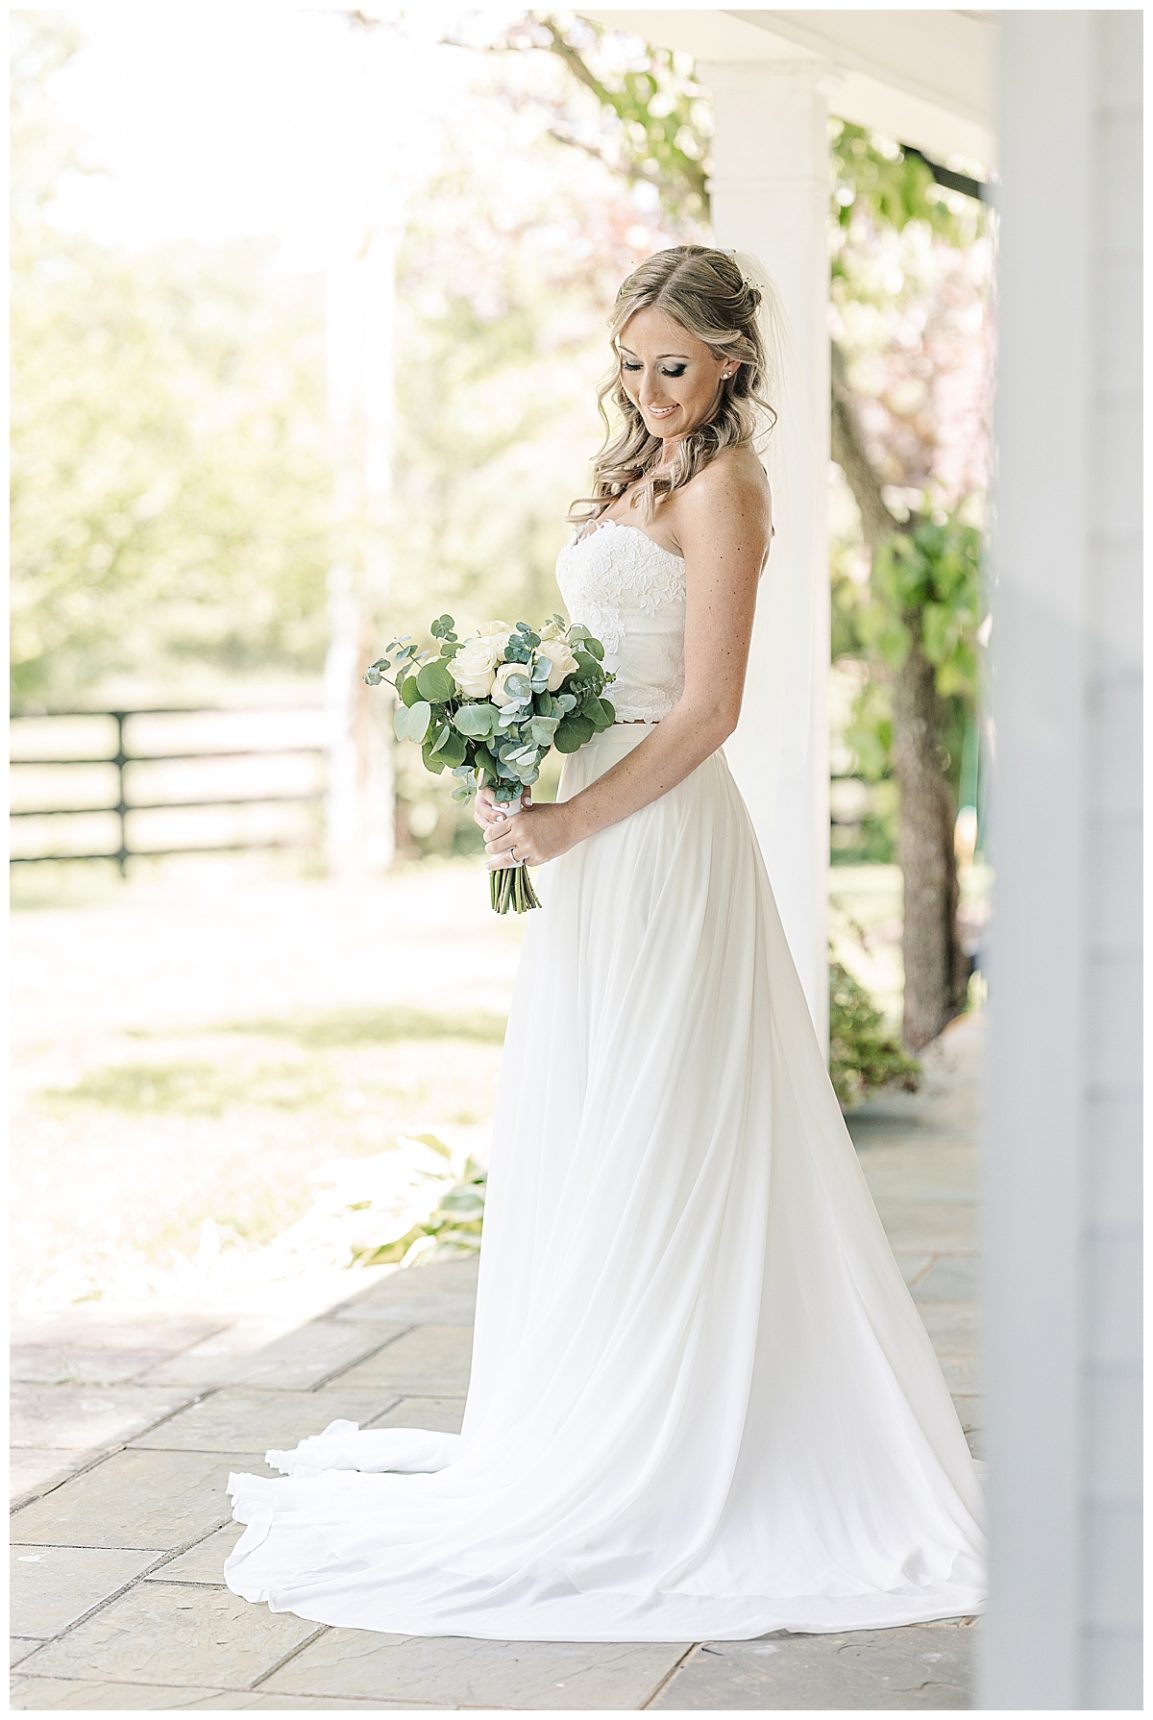 The Barns at Madison County; Virginia Wedding Venue; Virginia Barn Wedding; Etlan Weddings; Brooke Danielle Photography; Ava Laurenne Bride;